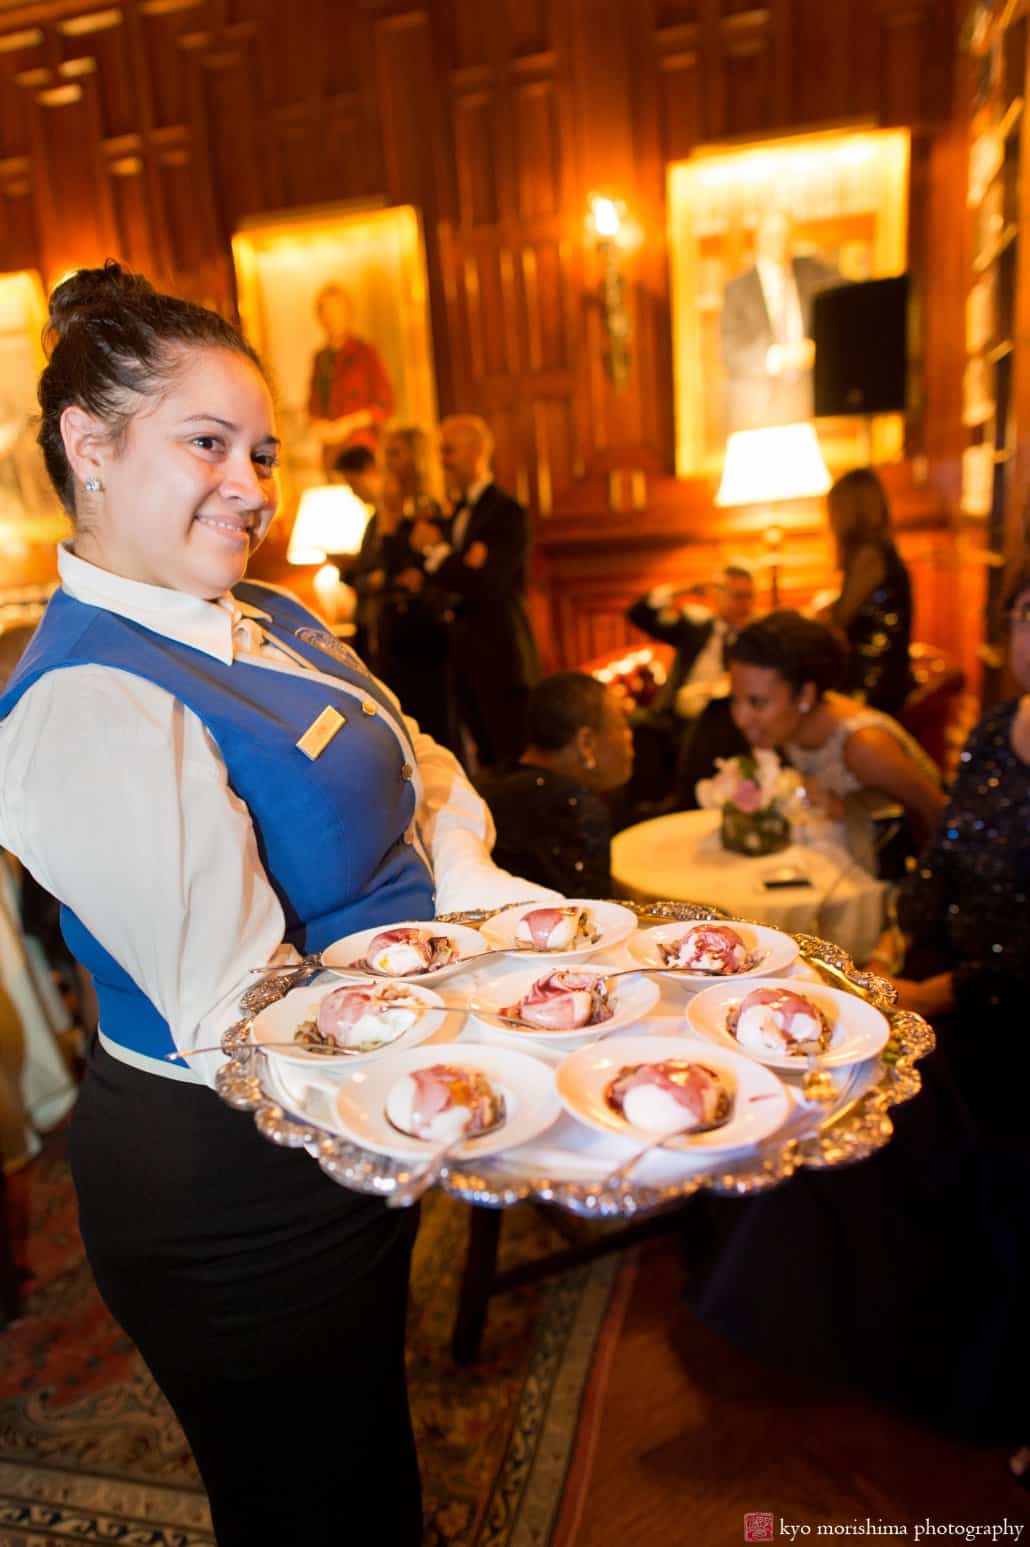 Waitress offers platter of food at Lotos Club wedding photographed by Kyo Morishima